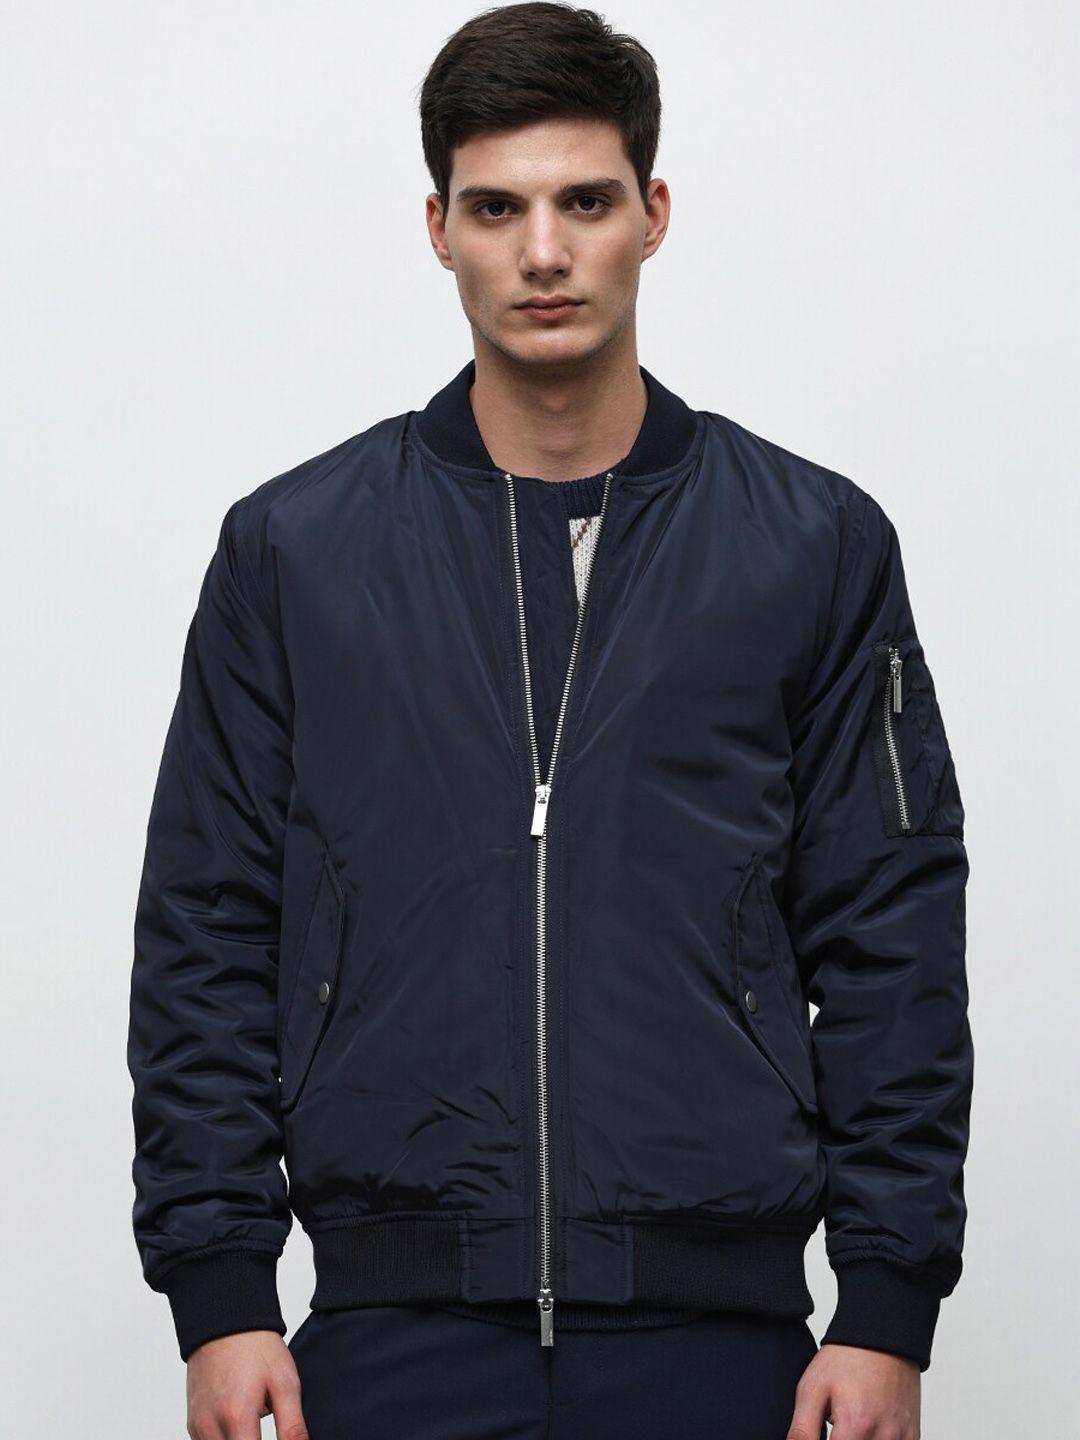 selected stand collar bomber jacket